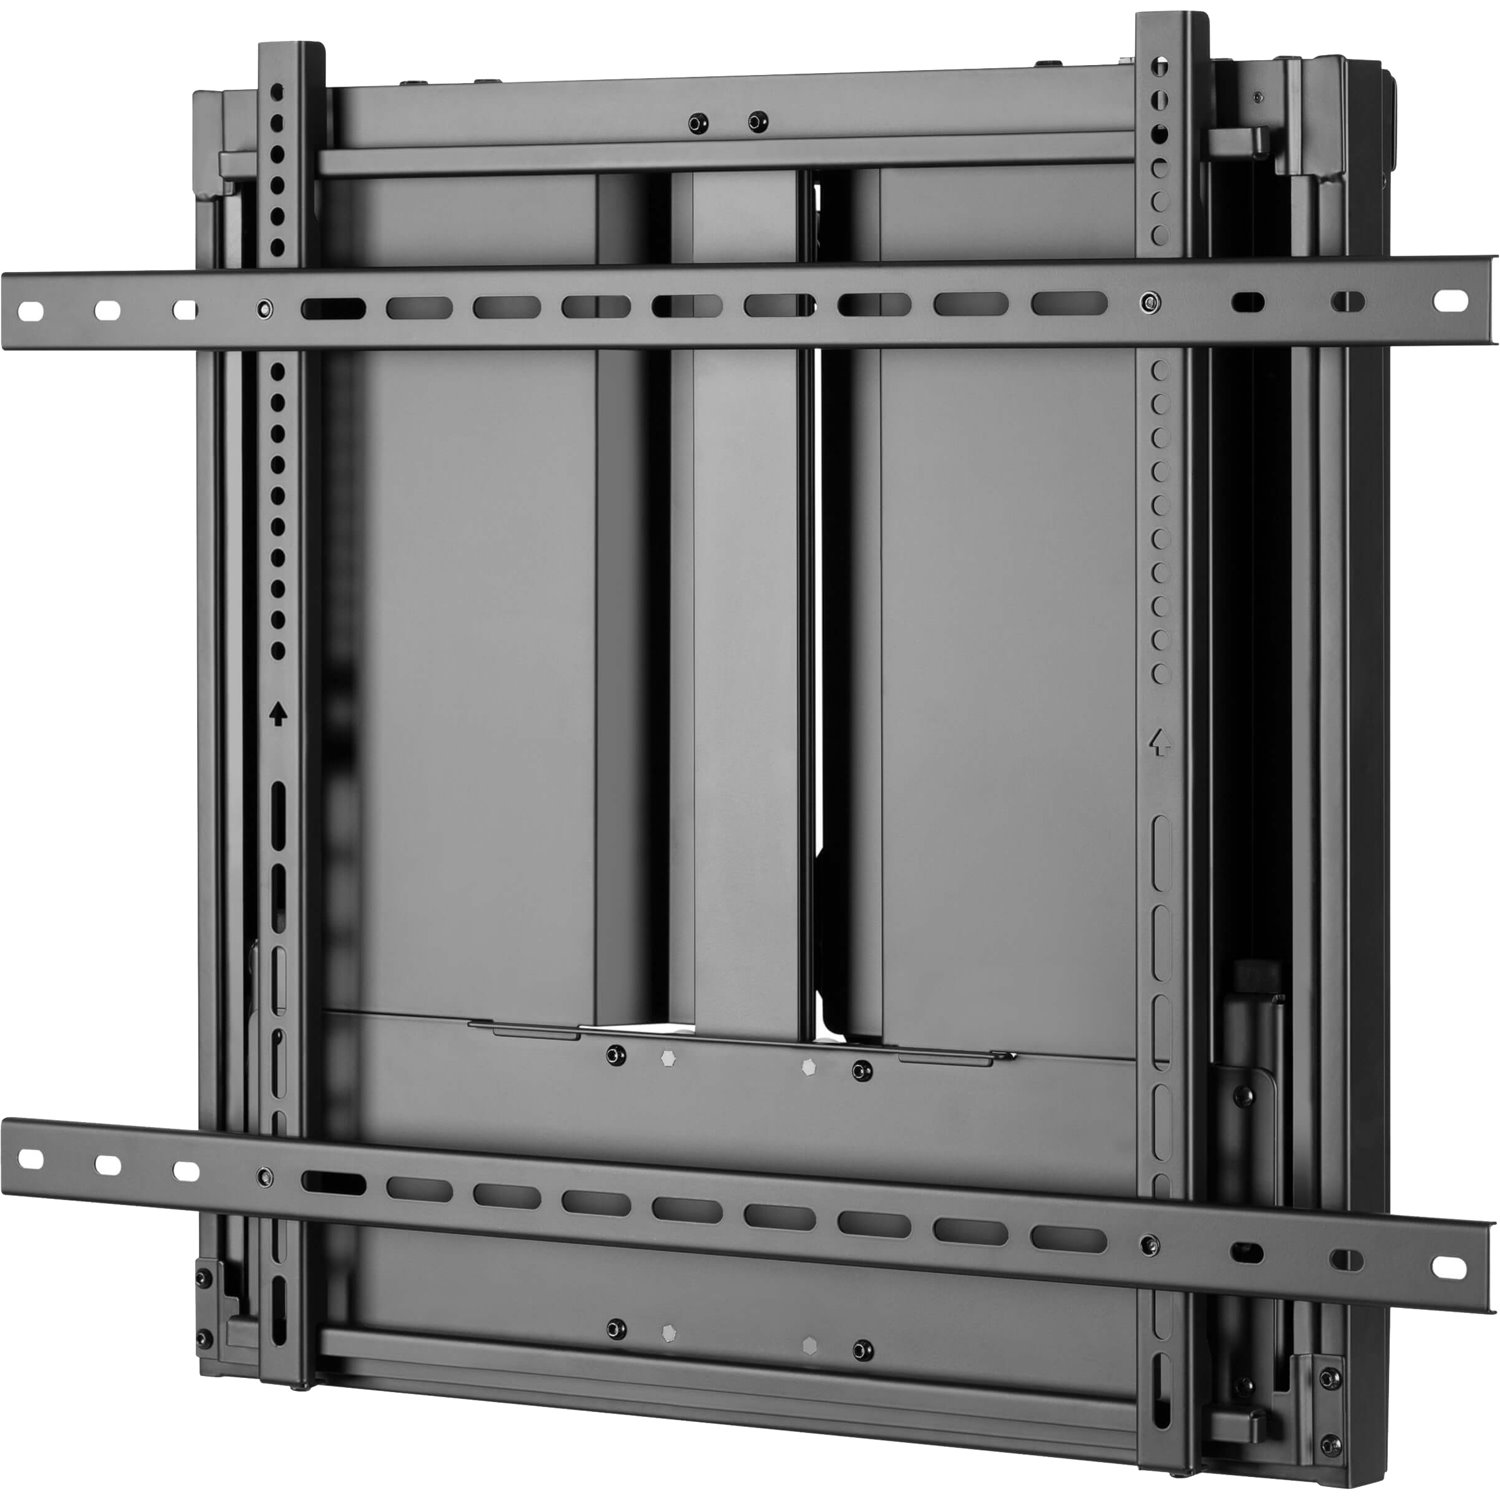 Tripp Lite by Eaton Height-Adjustable TV Wall Mount for 50" to 70" Flat-Panel Interactive Displays